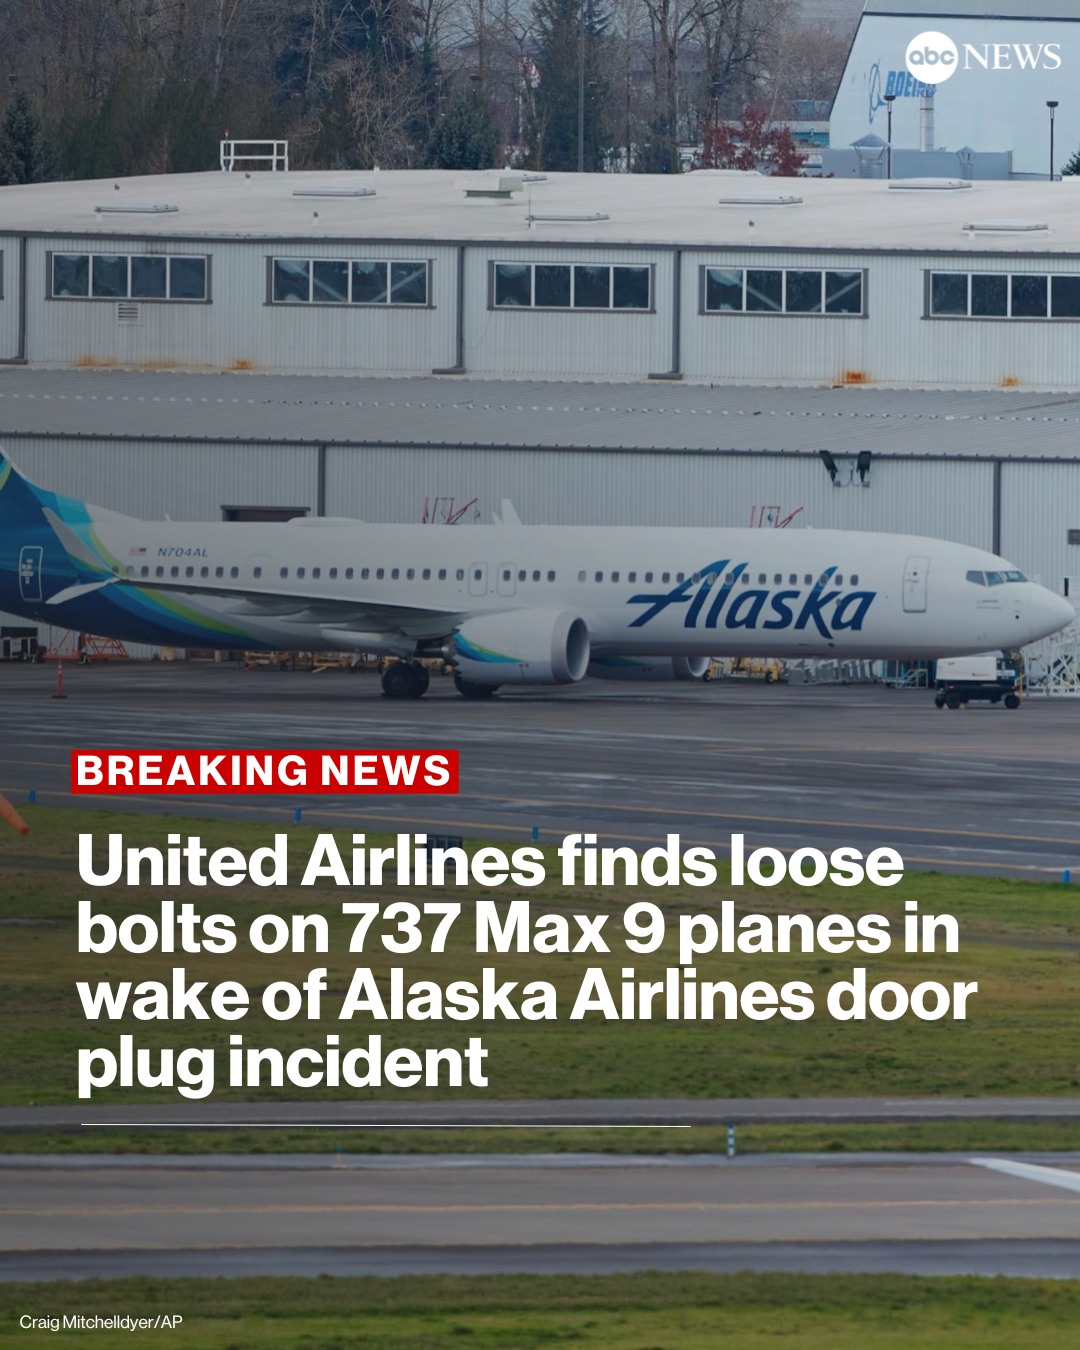 airline - N704AL Siiii... .... Craig MitchelldyerAp Alaska abc News Breaking News United Airlines finds loose bolts on 737 Max 9 planes in wake of Alaska Airlines door plug incident 16x32